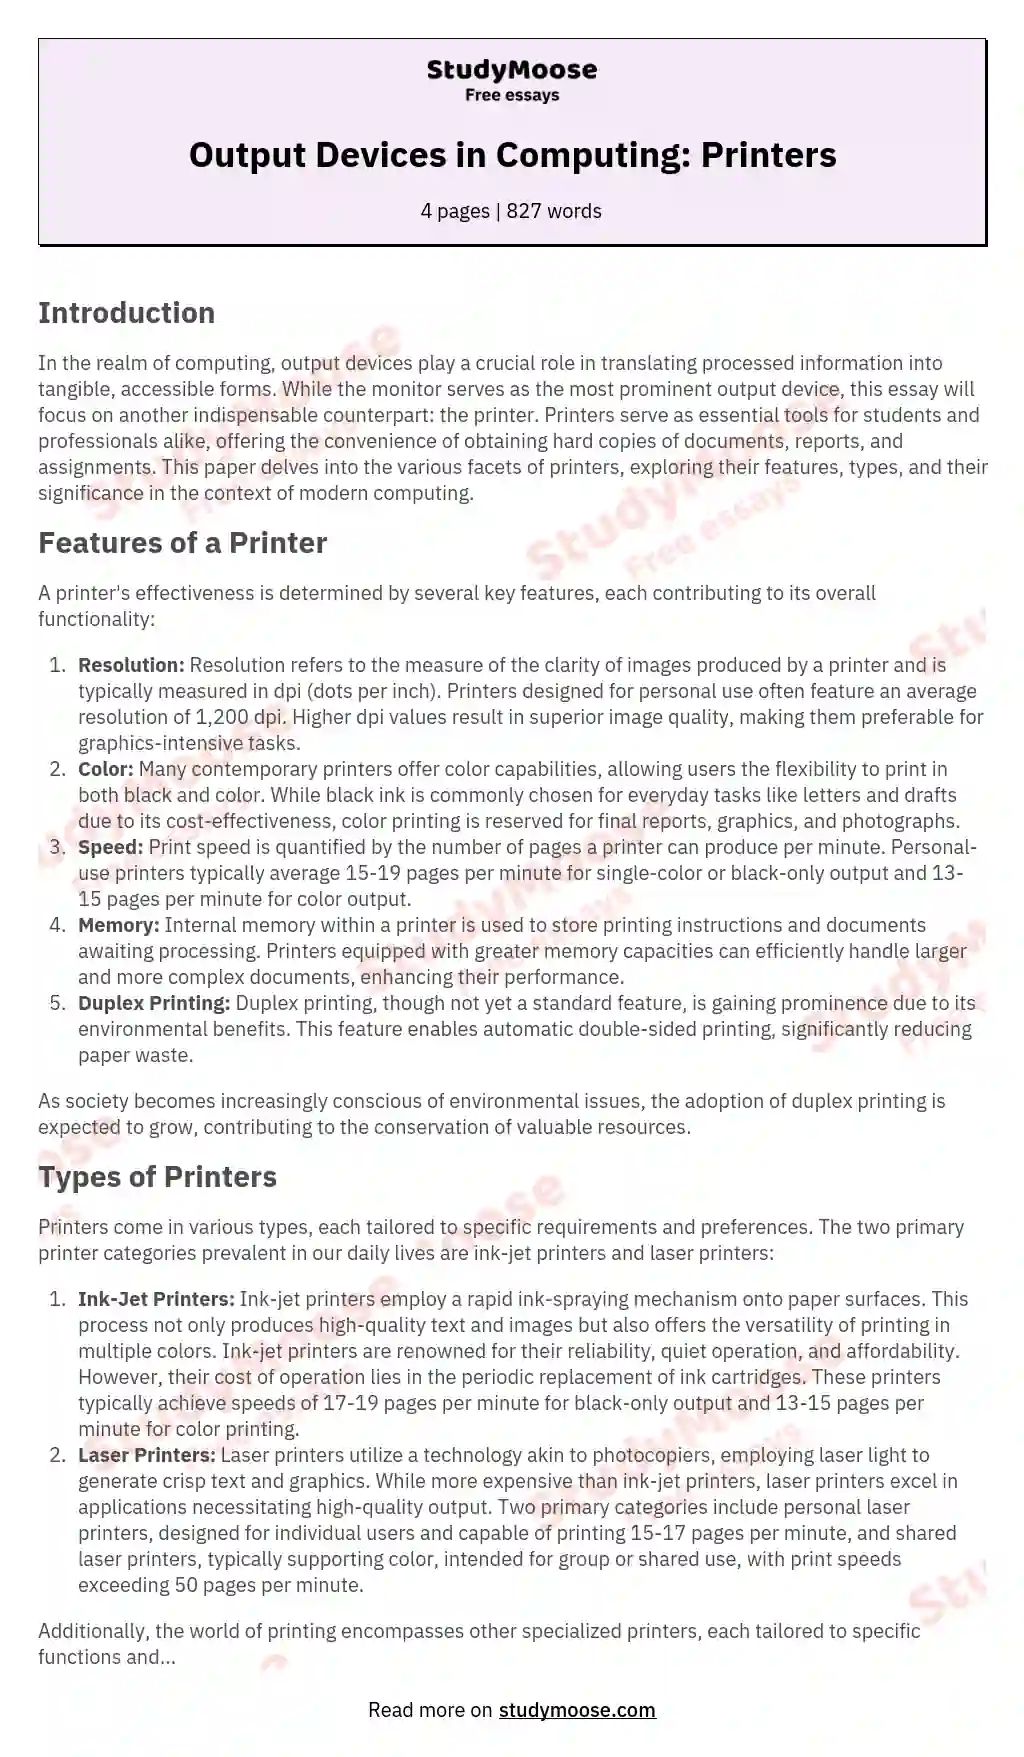 Output Devices in Computing: Printers essay